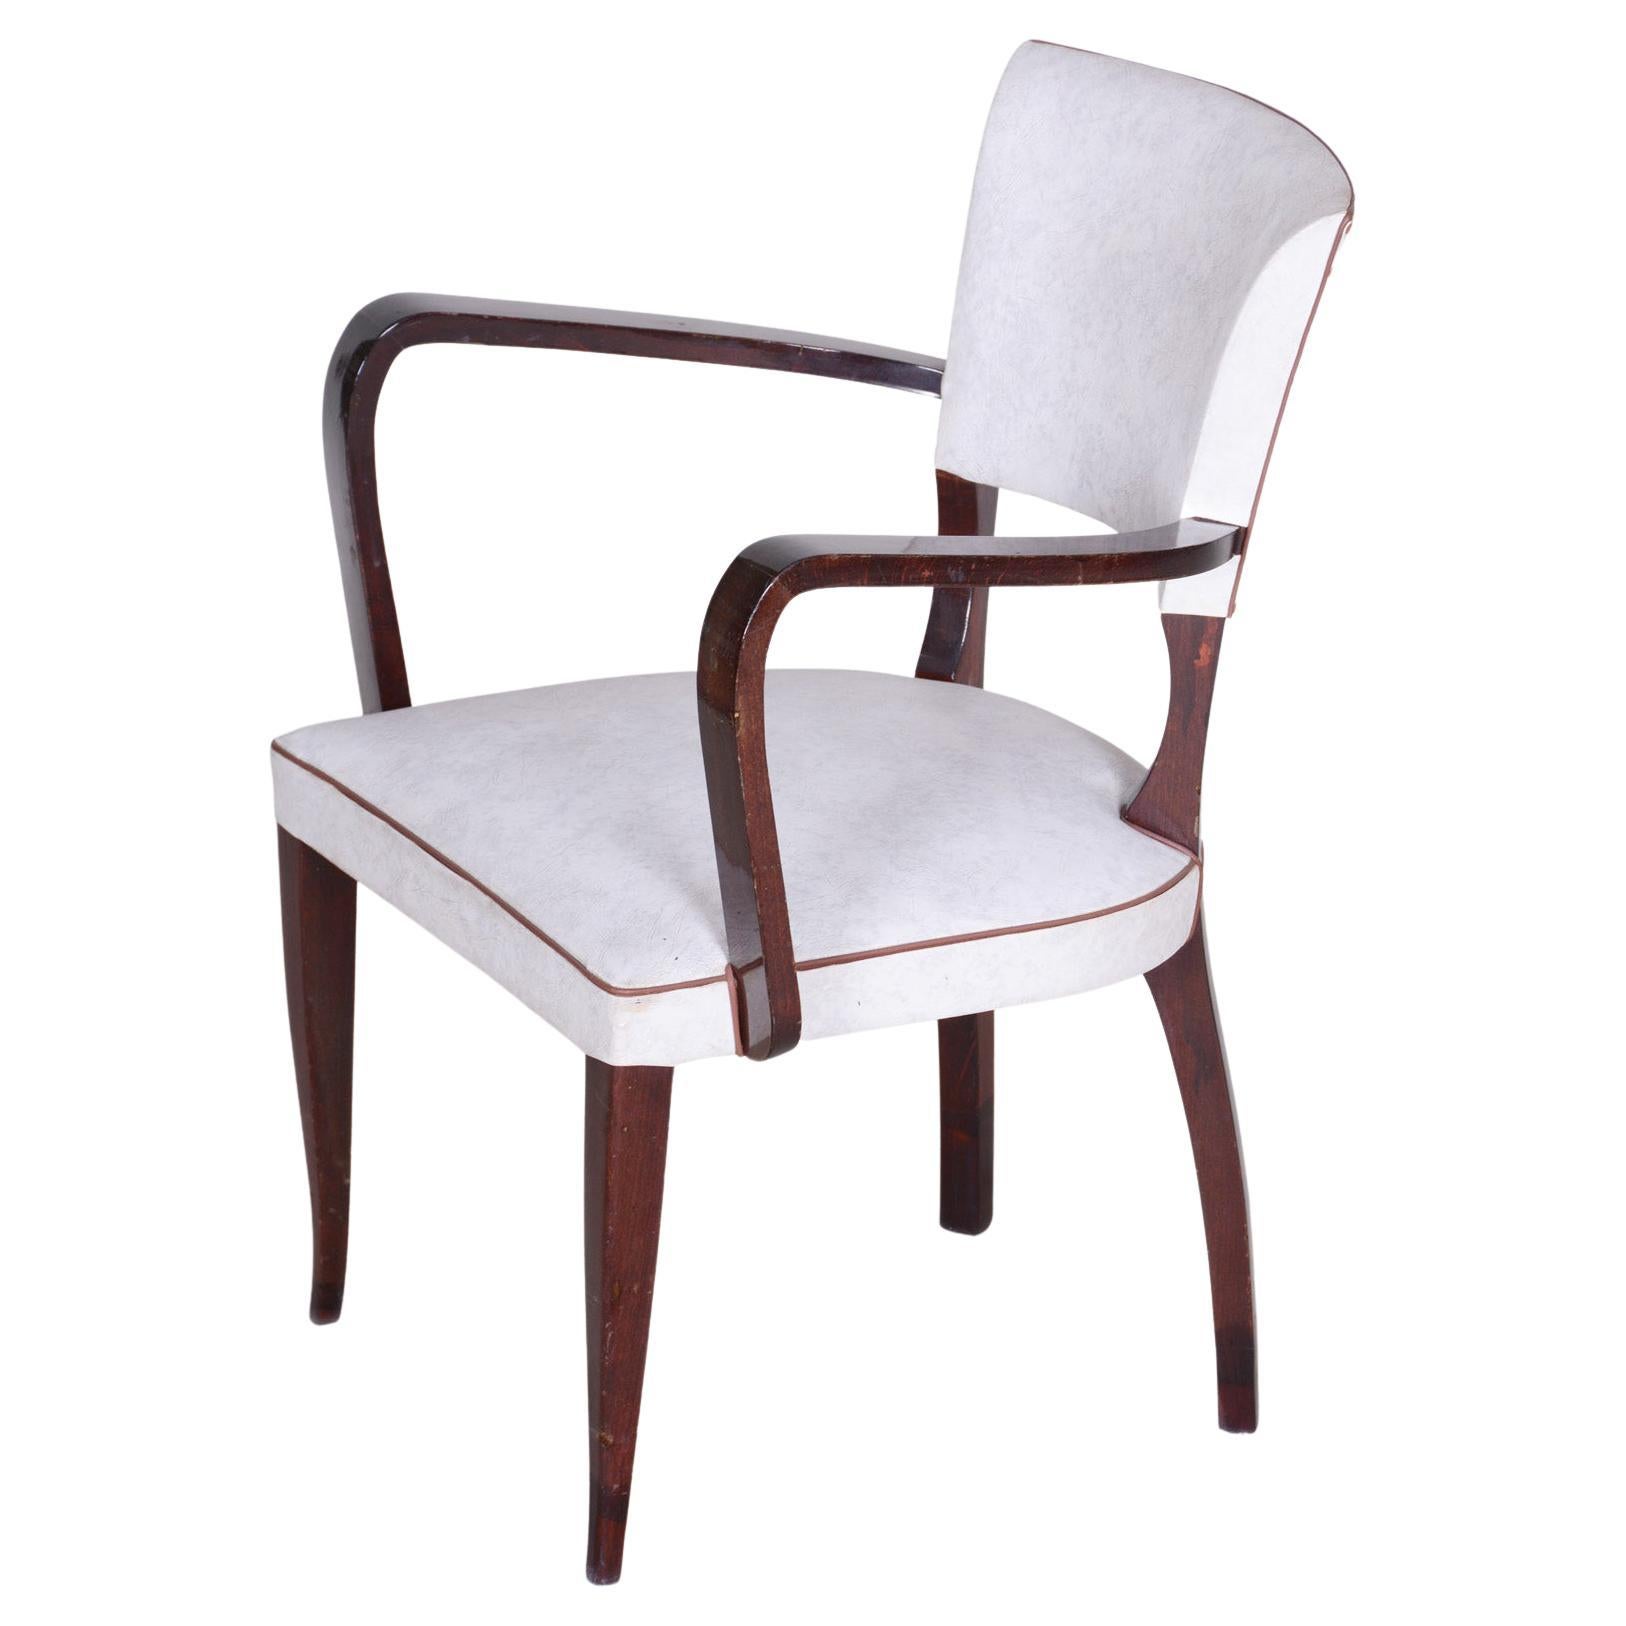 Restored White Armchair Made in France 1930, Upholstered with Artificial Leather